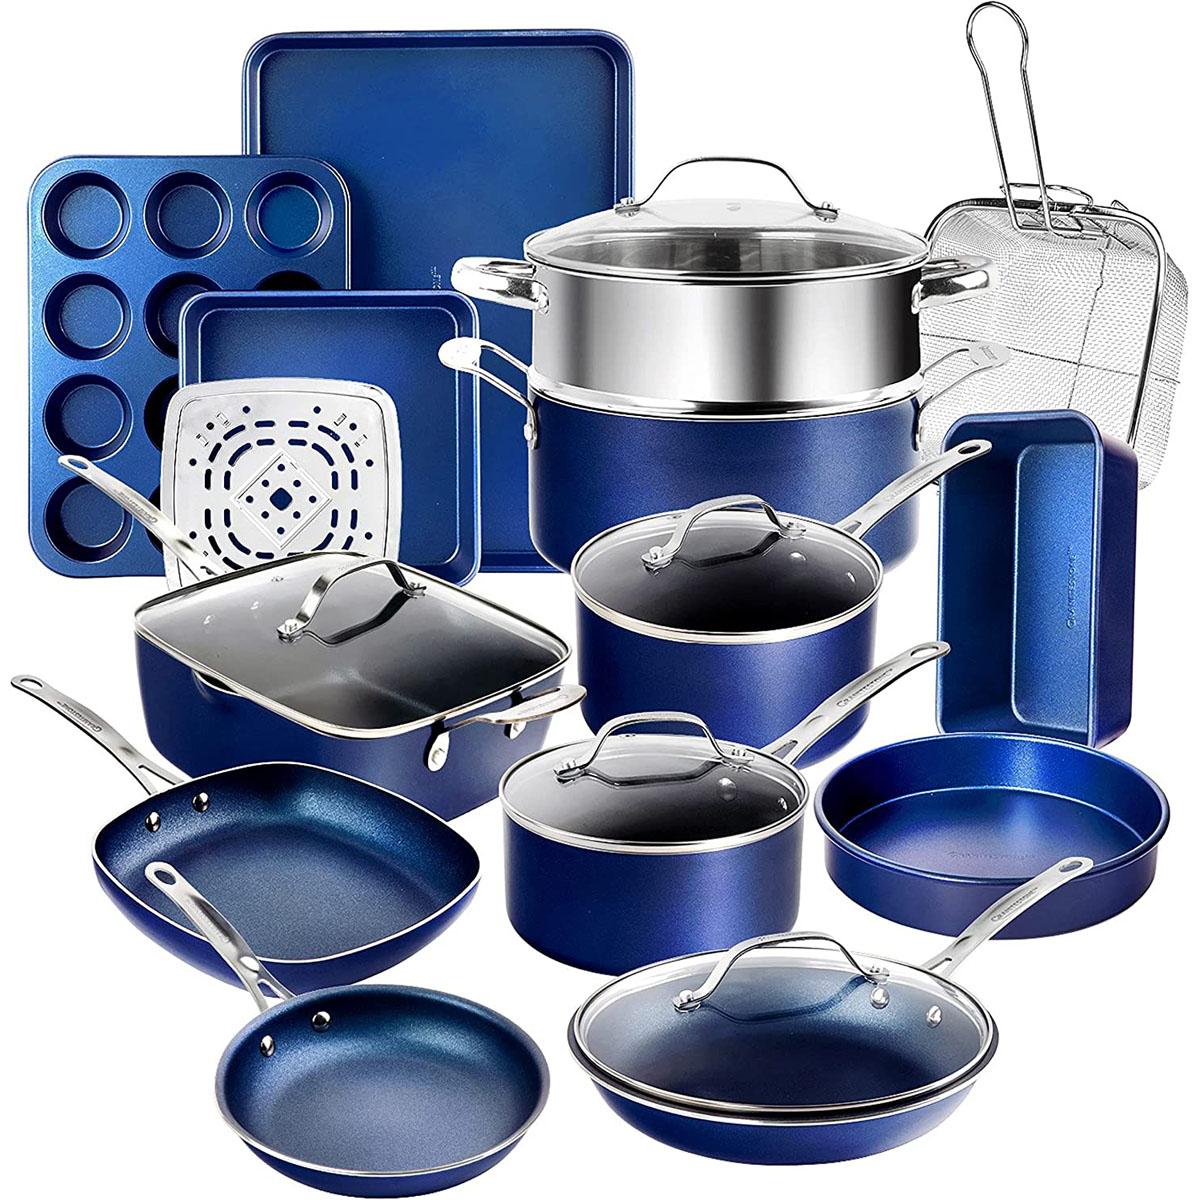 GraniteStone Blue Pots and Pans Cookware Set for $142.97 Shipped